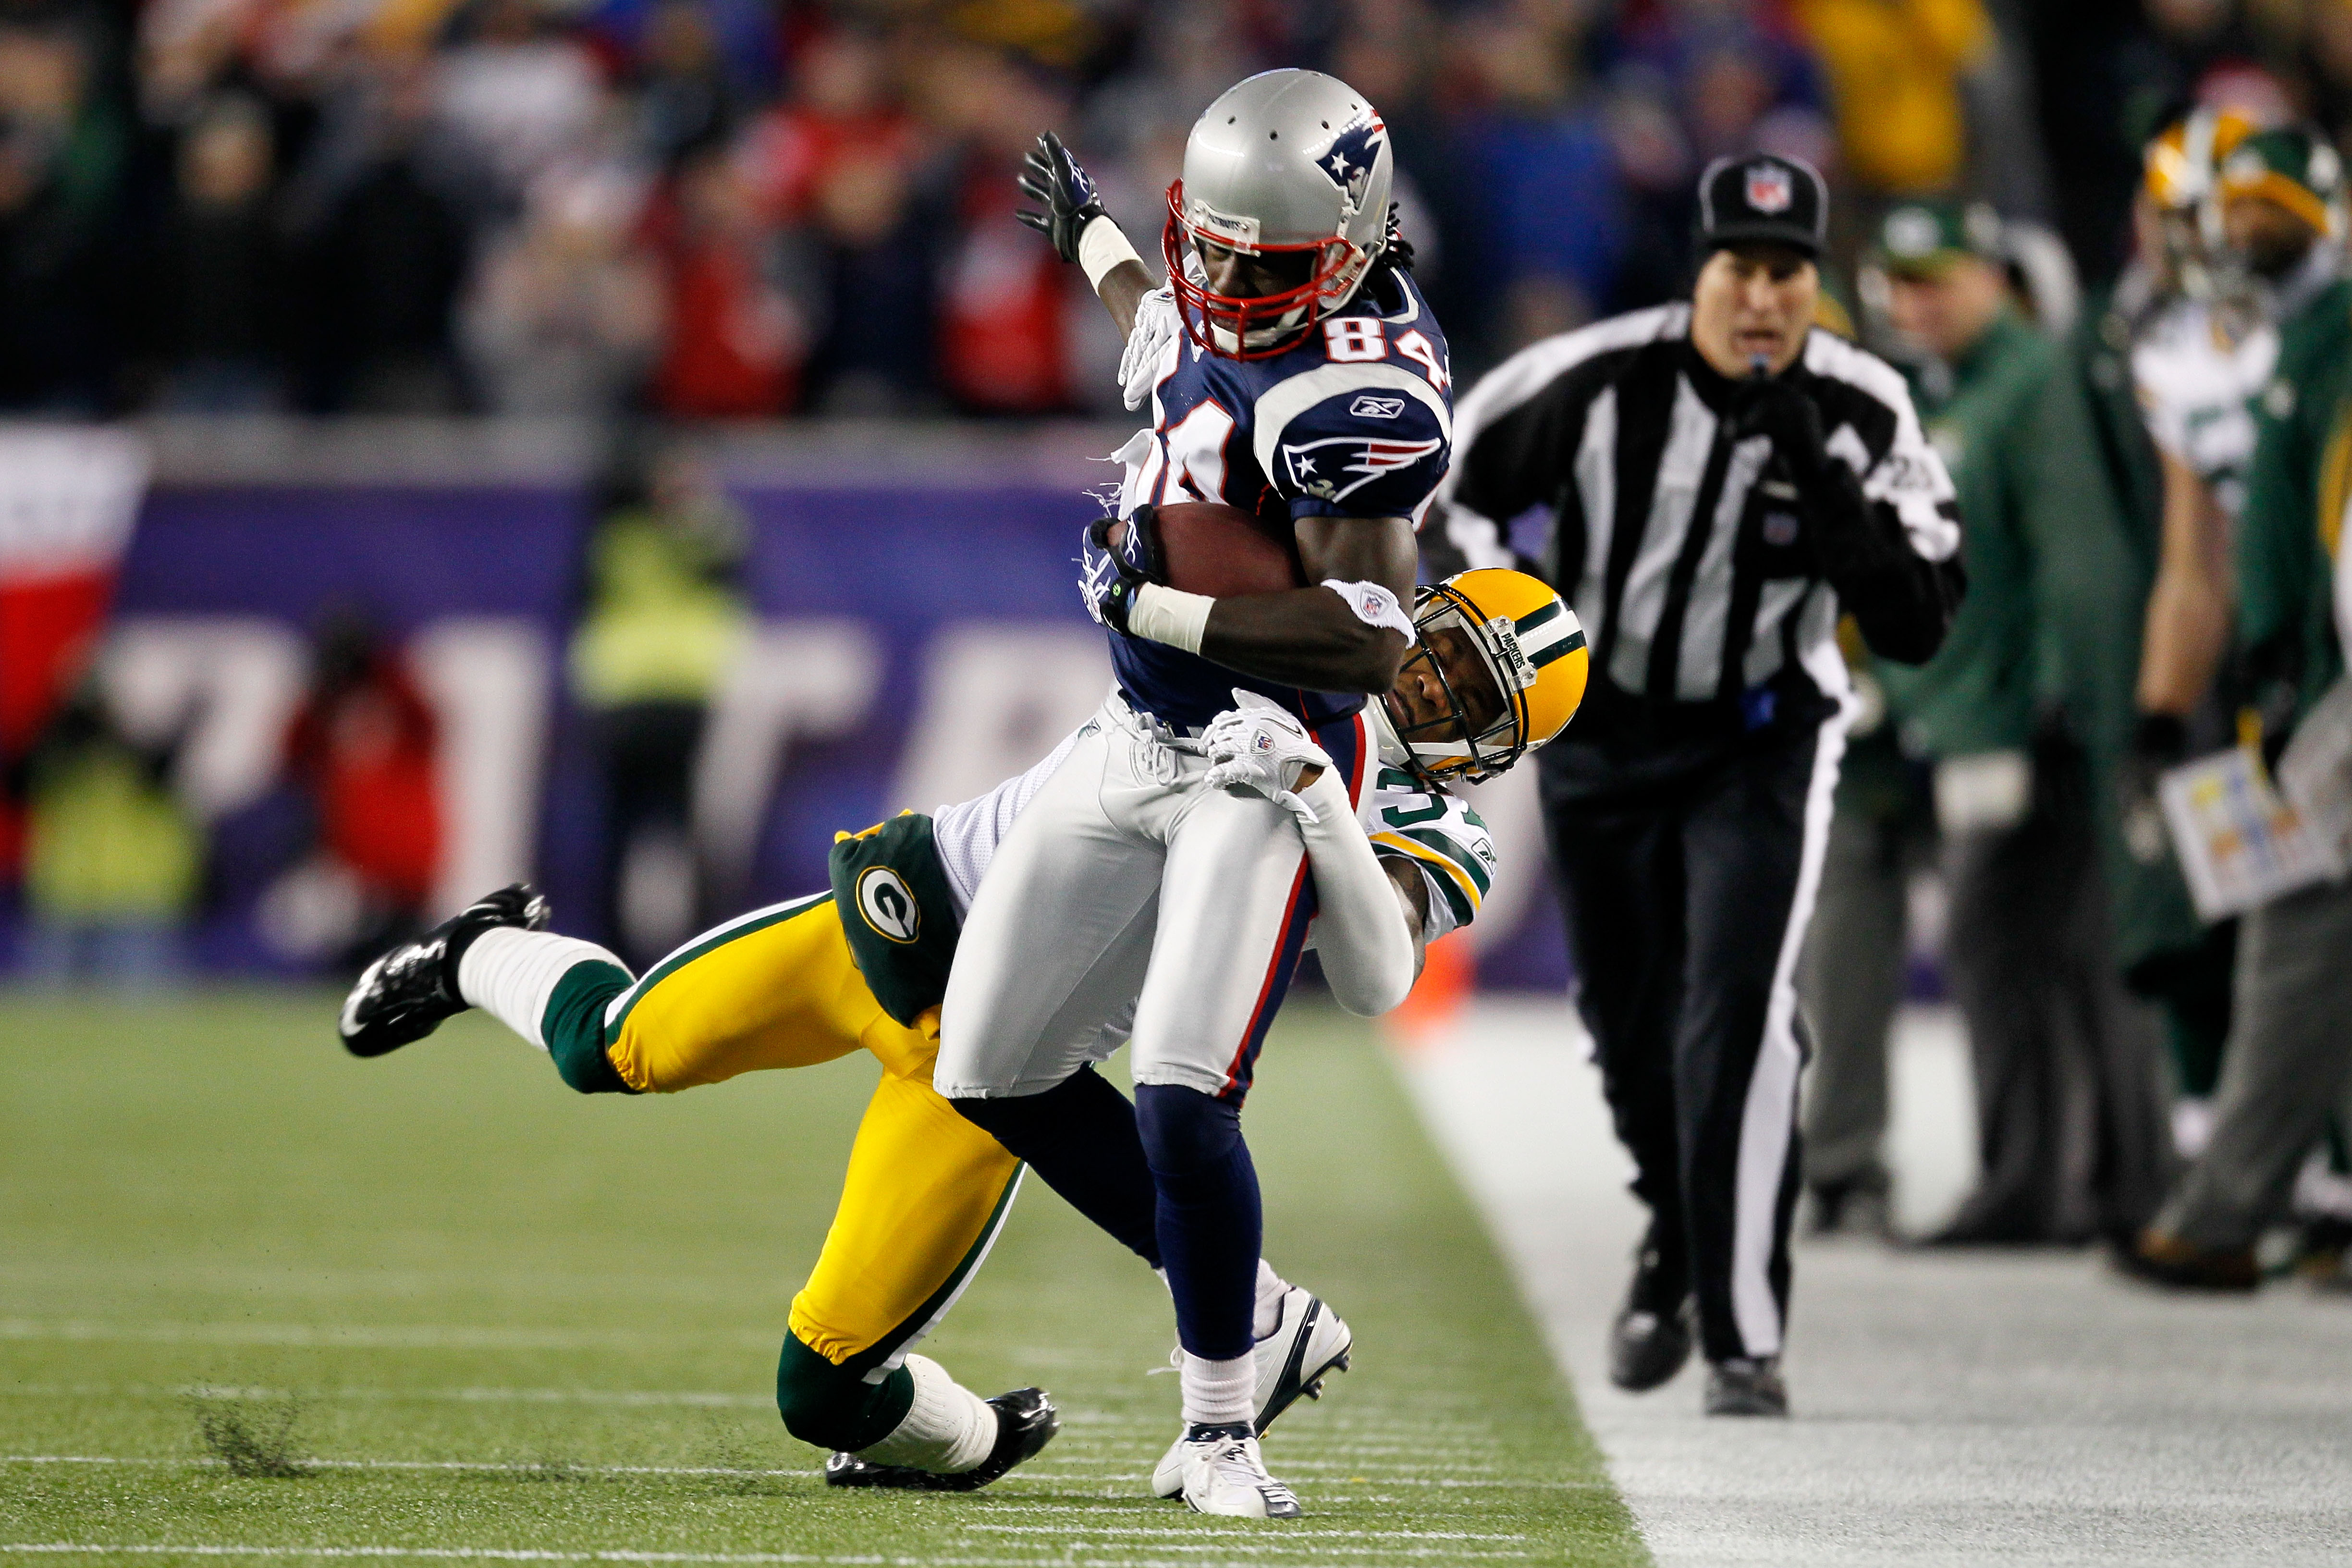 FOXBORO, MA - DECEMBER 19:  Wide receiver Deion Branch #84 of the New England Patriots is tackled by cornerback Sam Shields #37 of the Green Bay Packers during the first quarter at Gillette Stadium on December 19, 2010 in Foxboro, Massachusetts.  (Photo b